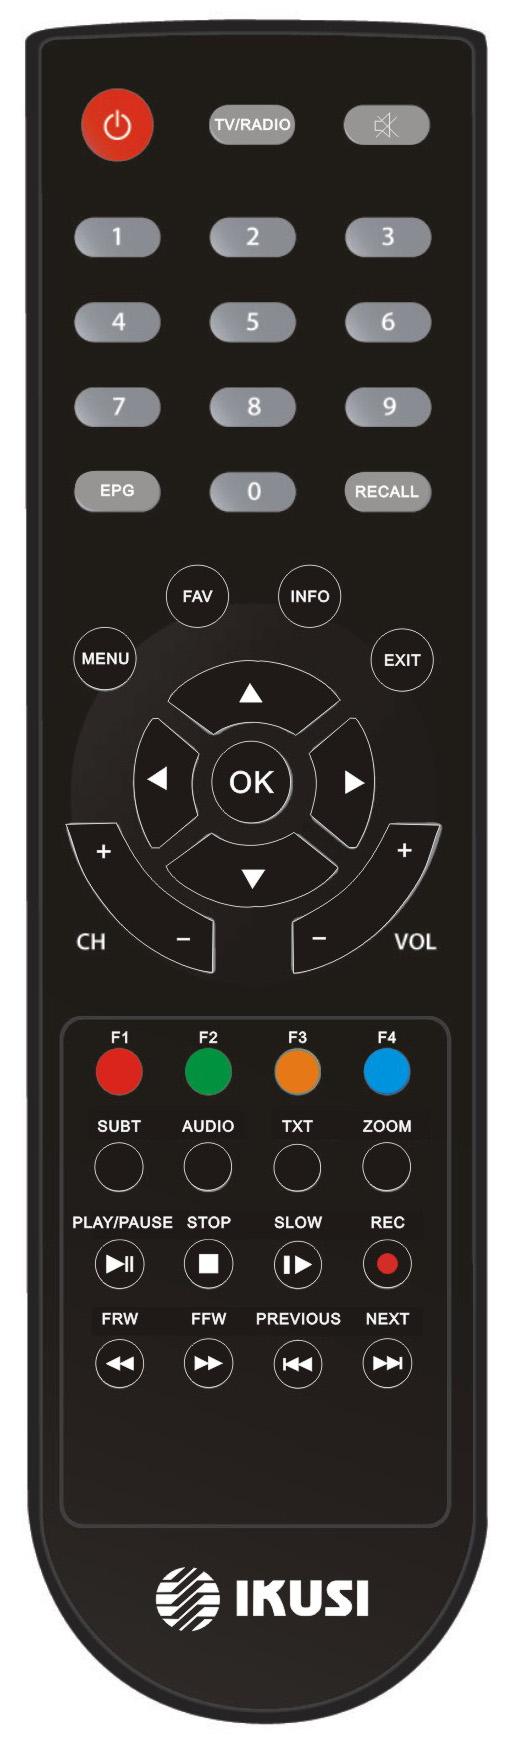 SMARTmini Receiver Settings 3. REMOTE CONTROL BUTTONS 4. RECEIVING DTT (Digital Terrestrial Television) 4.